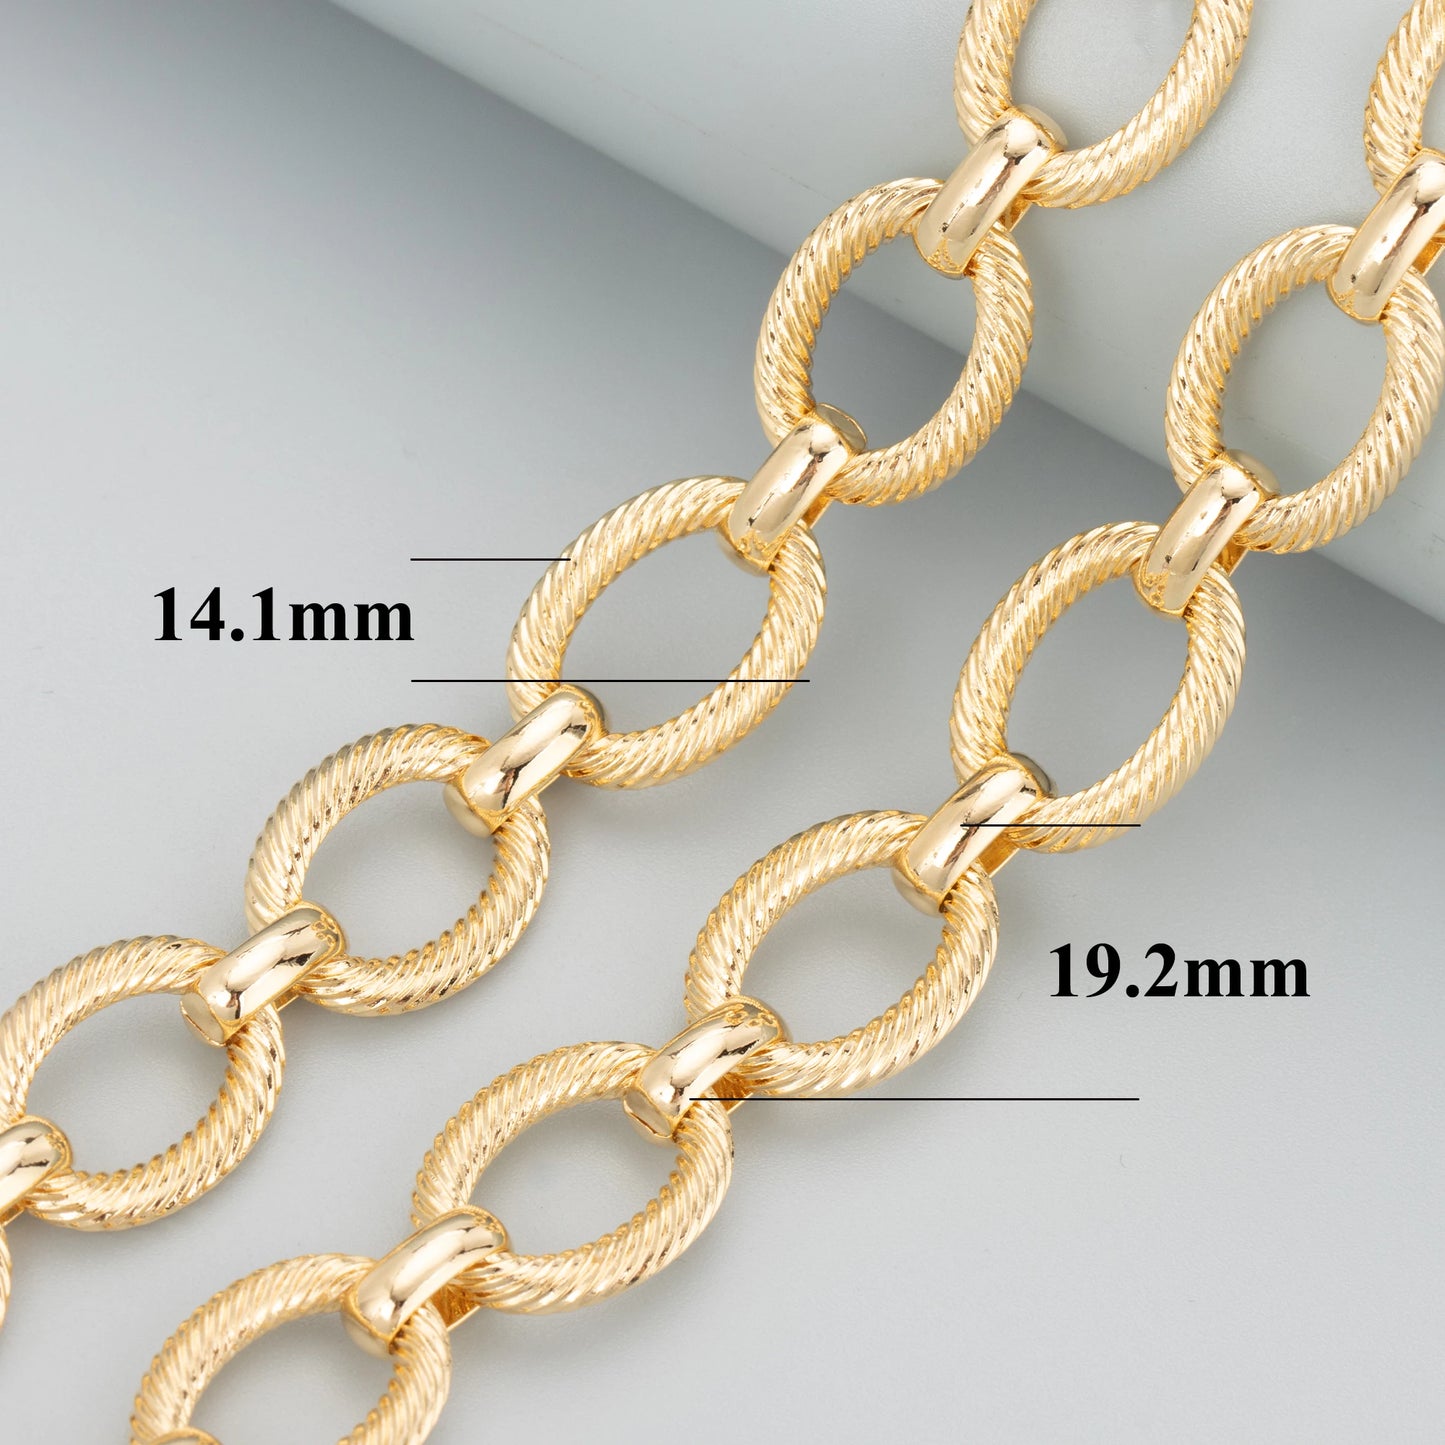 GUFEATHER C145,diy chain,pass REACH,nickel free,18k gold rhodium plated,hand made,jewelry making,diy bracelet necklace,1m/lot